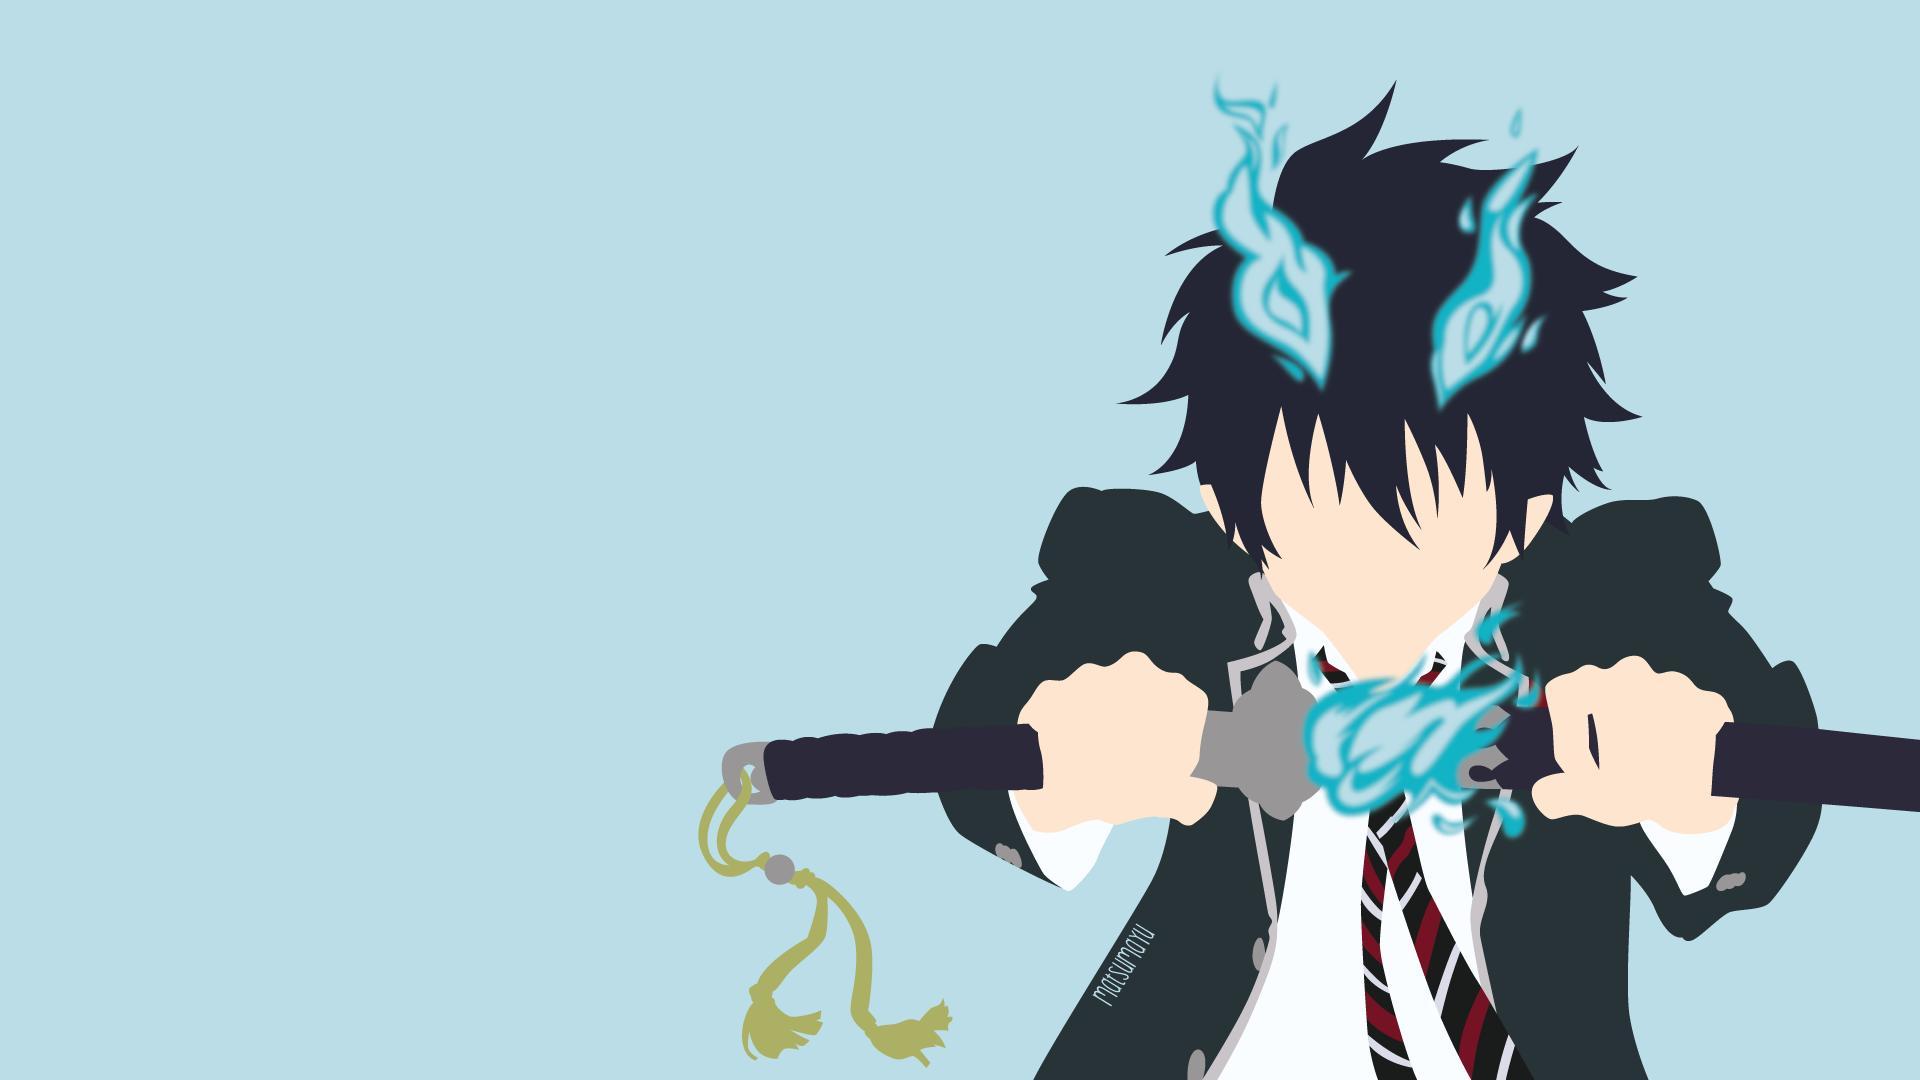 Anime wallpaper ( Vector & Minimalist ) for Android